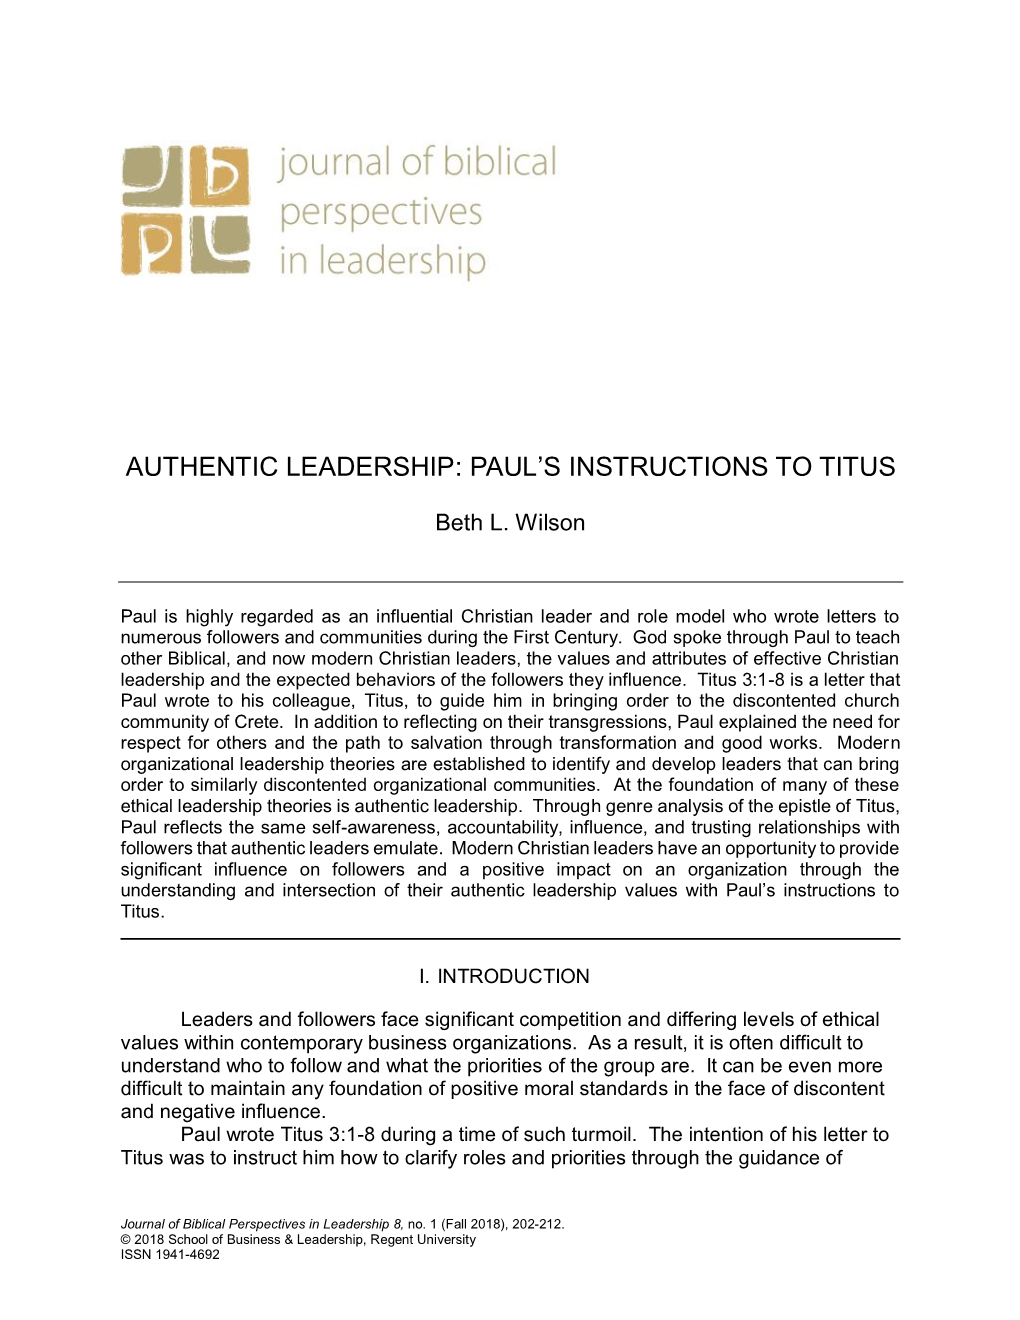 Authentic Leadership: Paul's Instructions to Titus